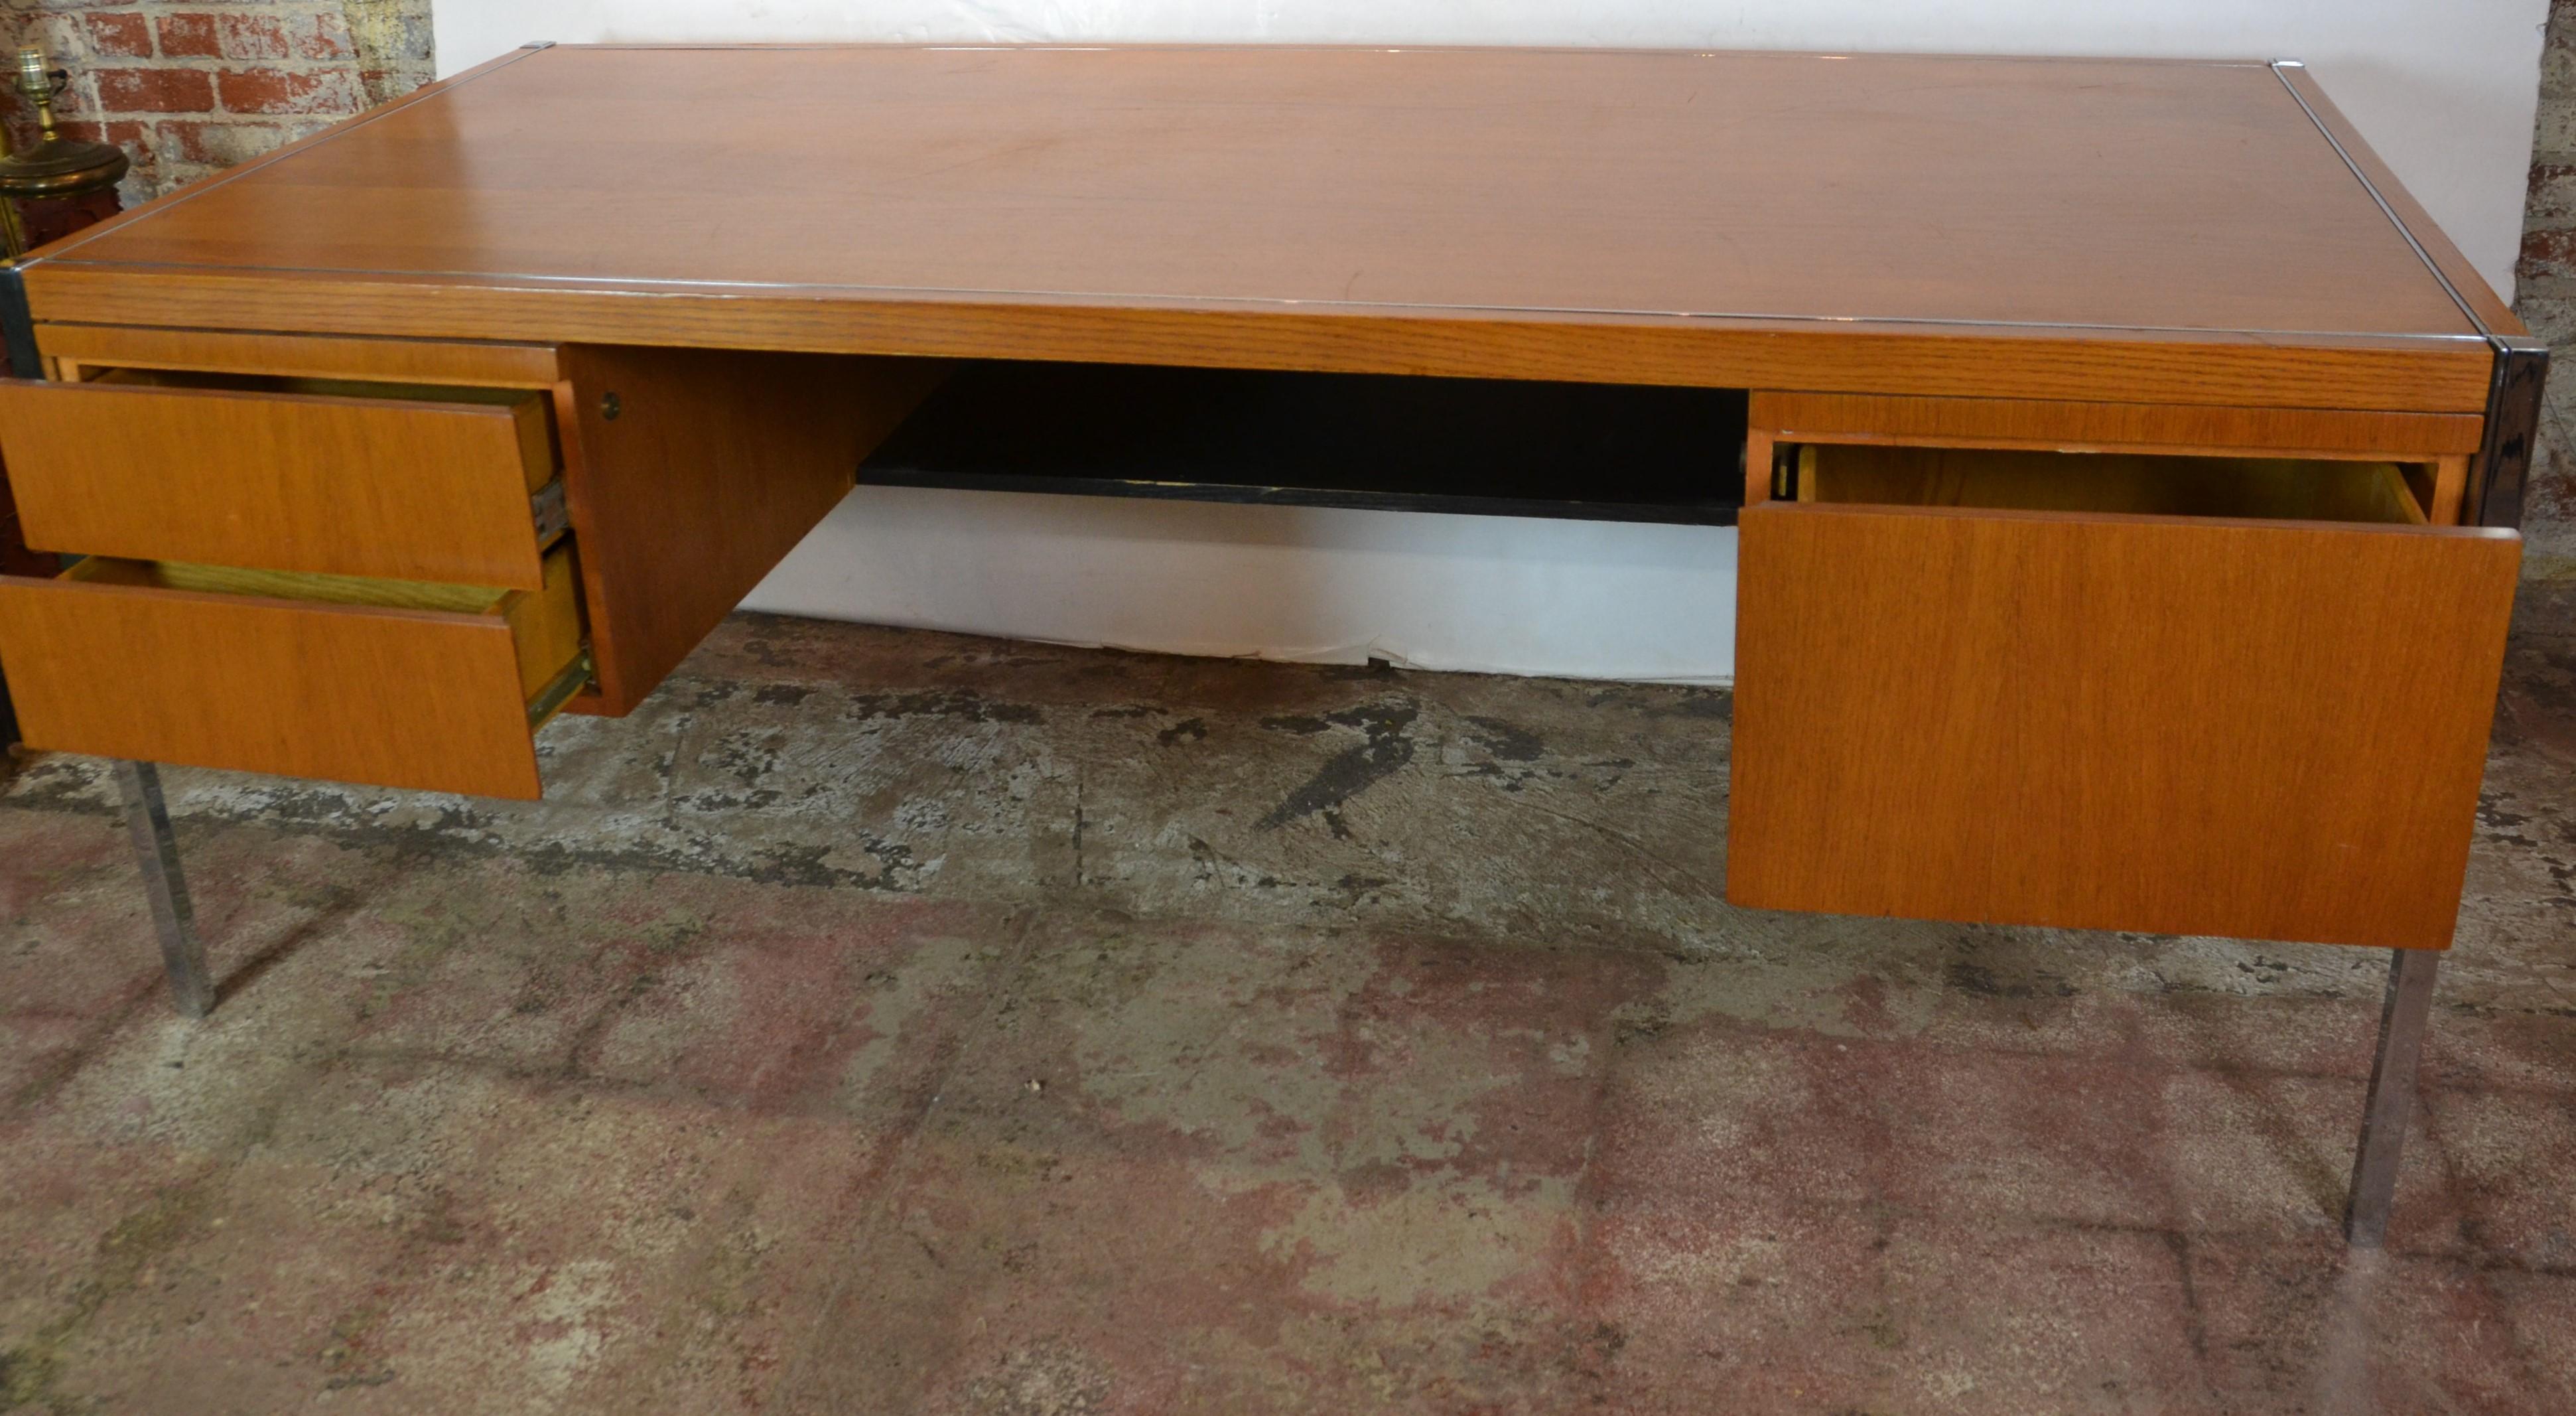 Very good quality executive style teak wood, chrome accents desk. Keys are not included.